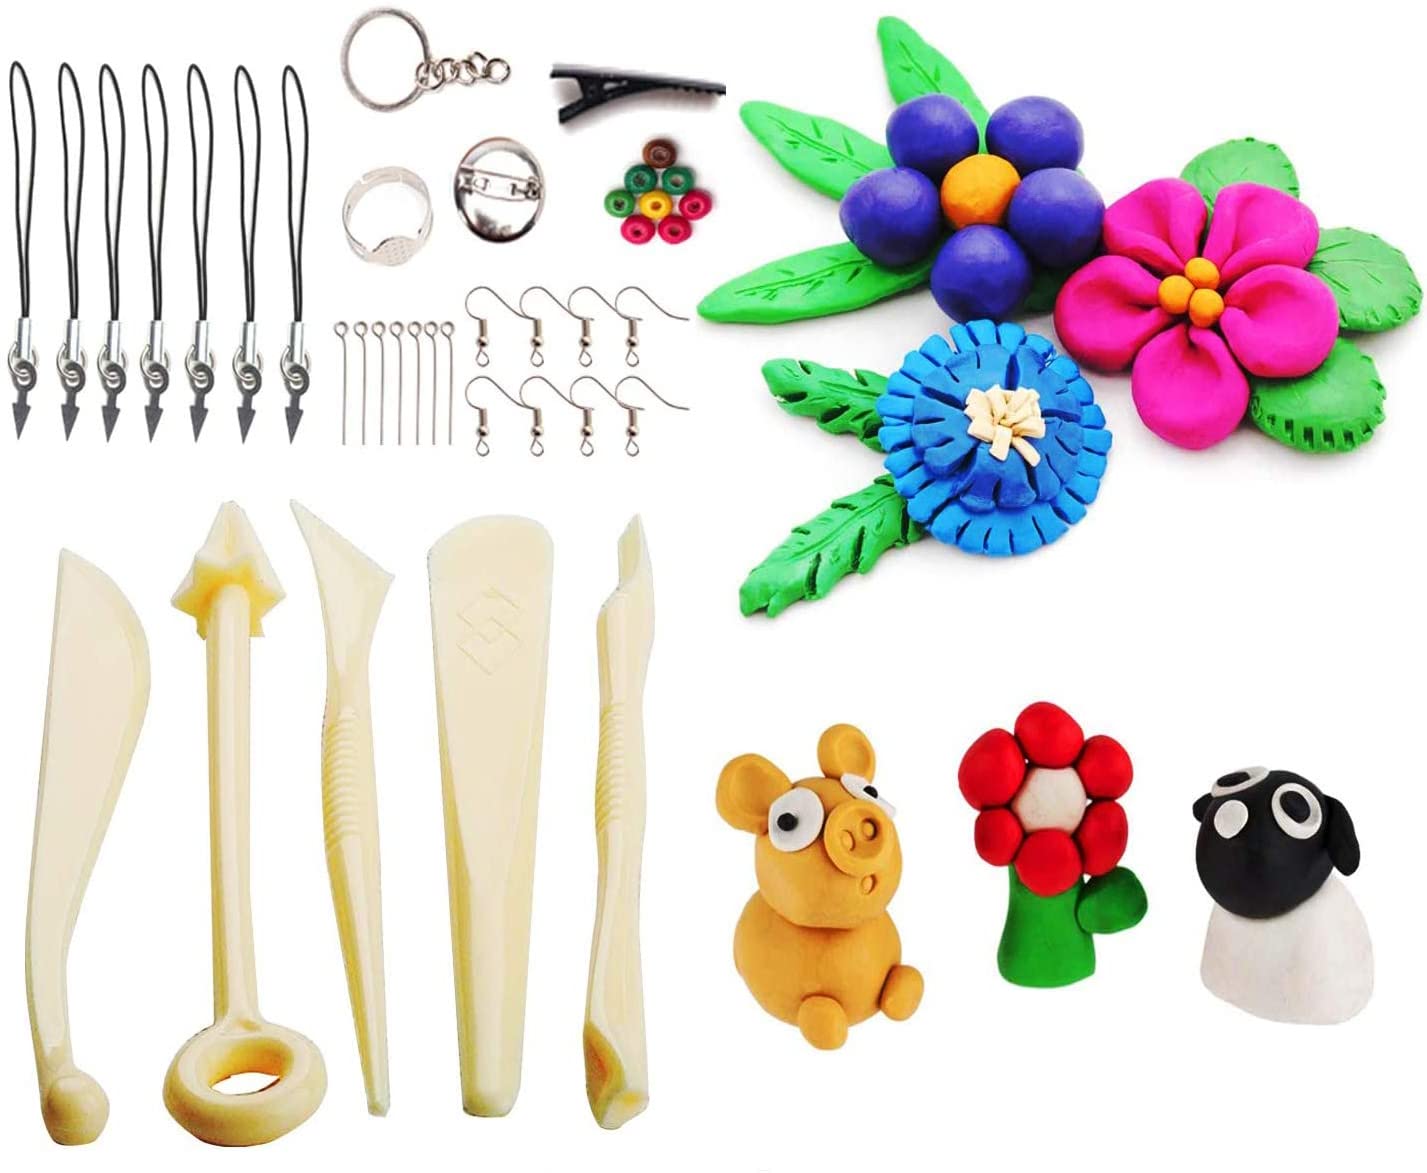 $32.30 - CiaraQ Polymer Clay Kit, 60 Colors Oven Bake Modeling Clay for  Adults and Kids with 5 Sculpting Tools, Polymer Clay Starter Kit @   Australia - RewardBargain